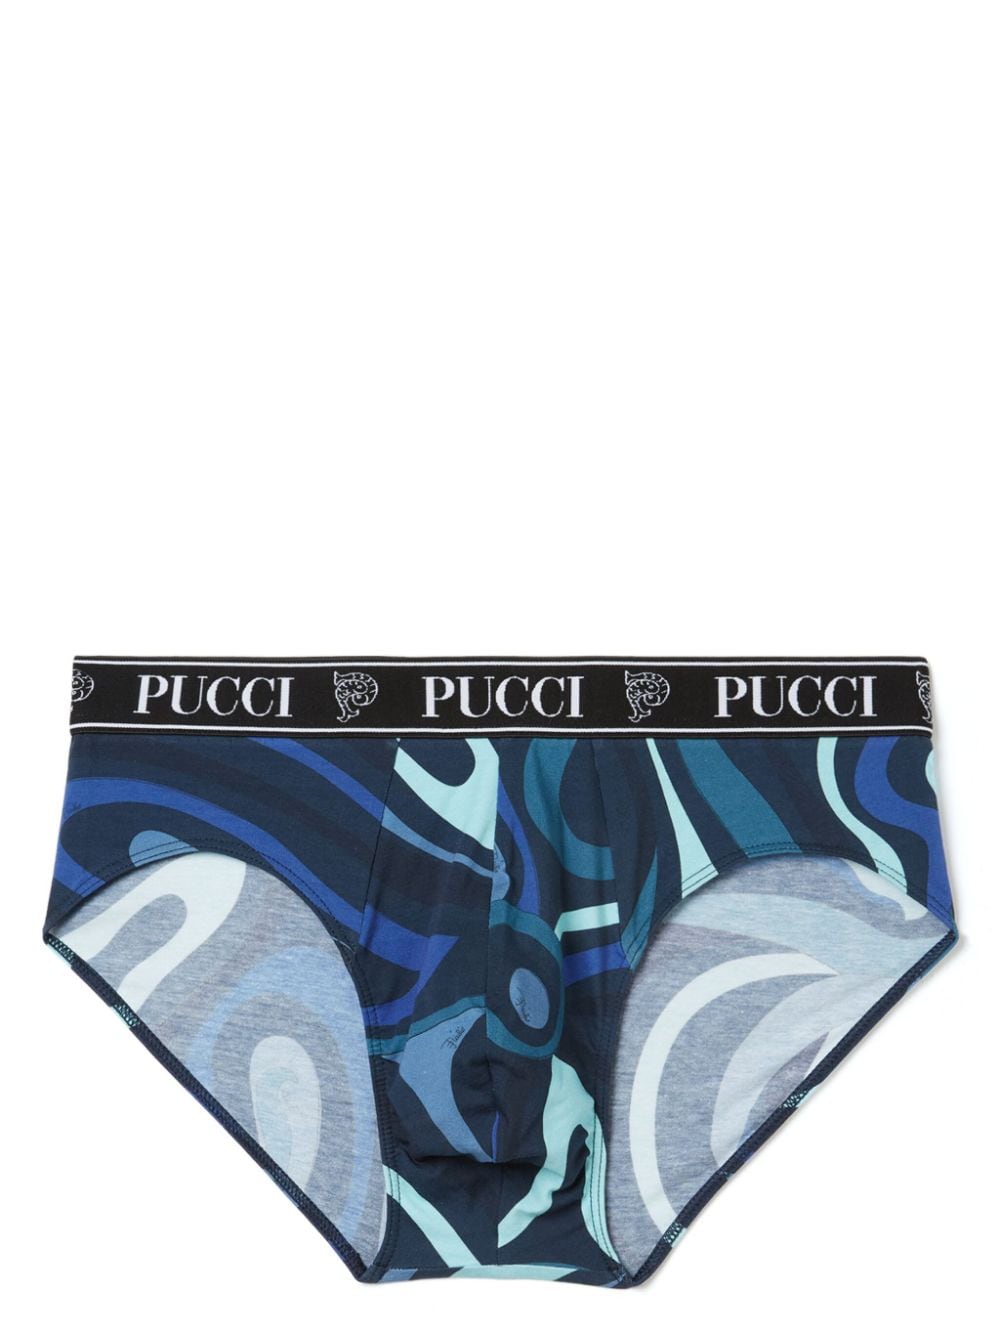 PUCCI Drie slips met logoband - Wit